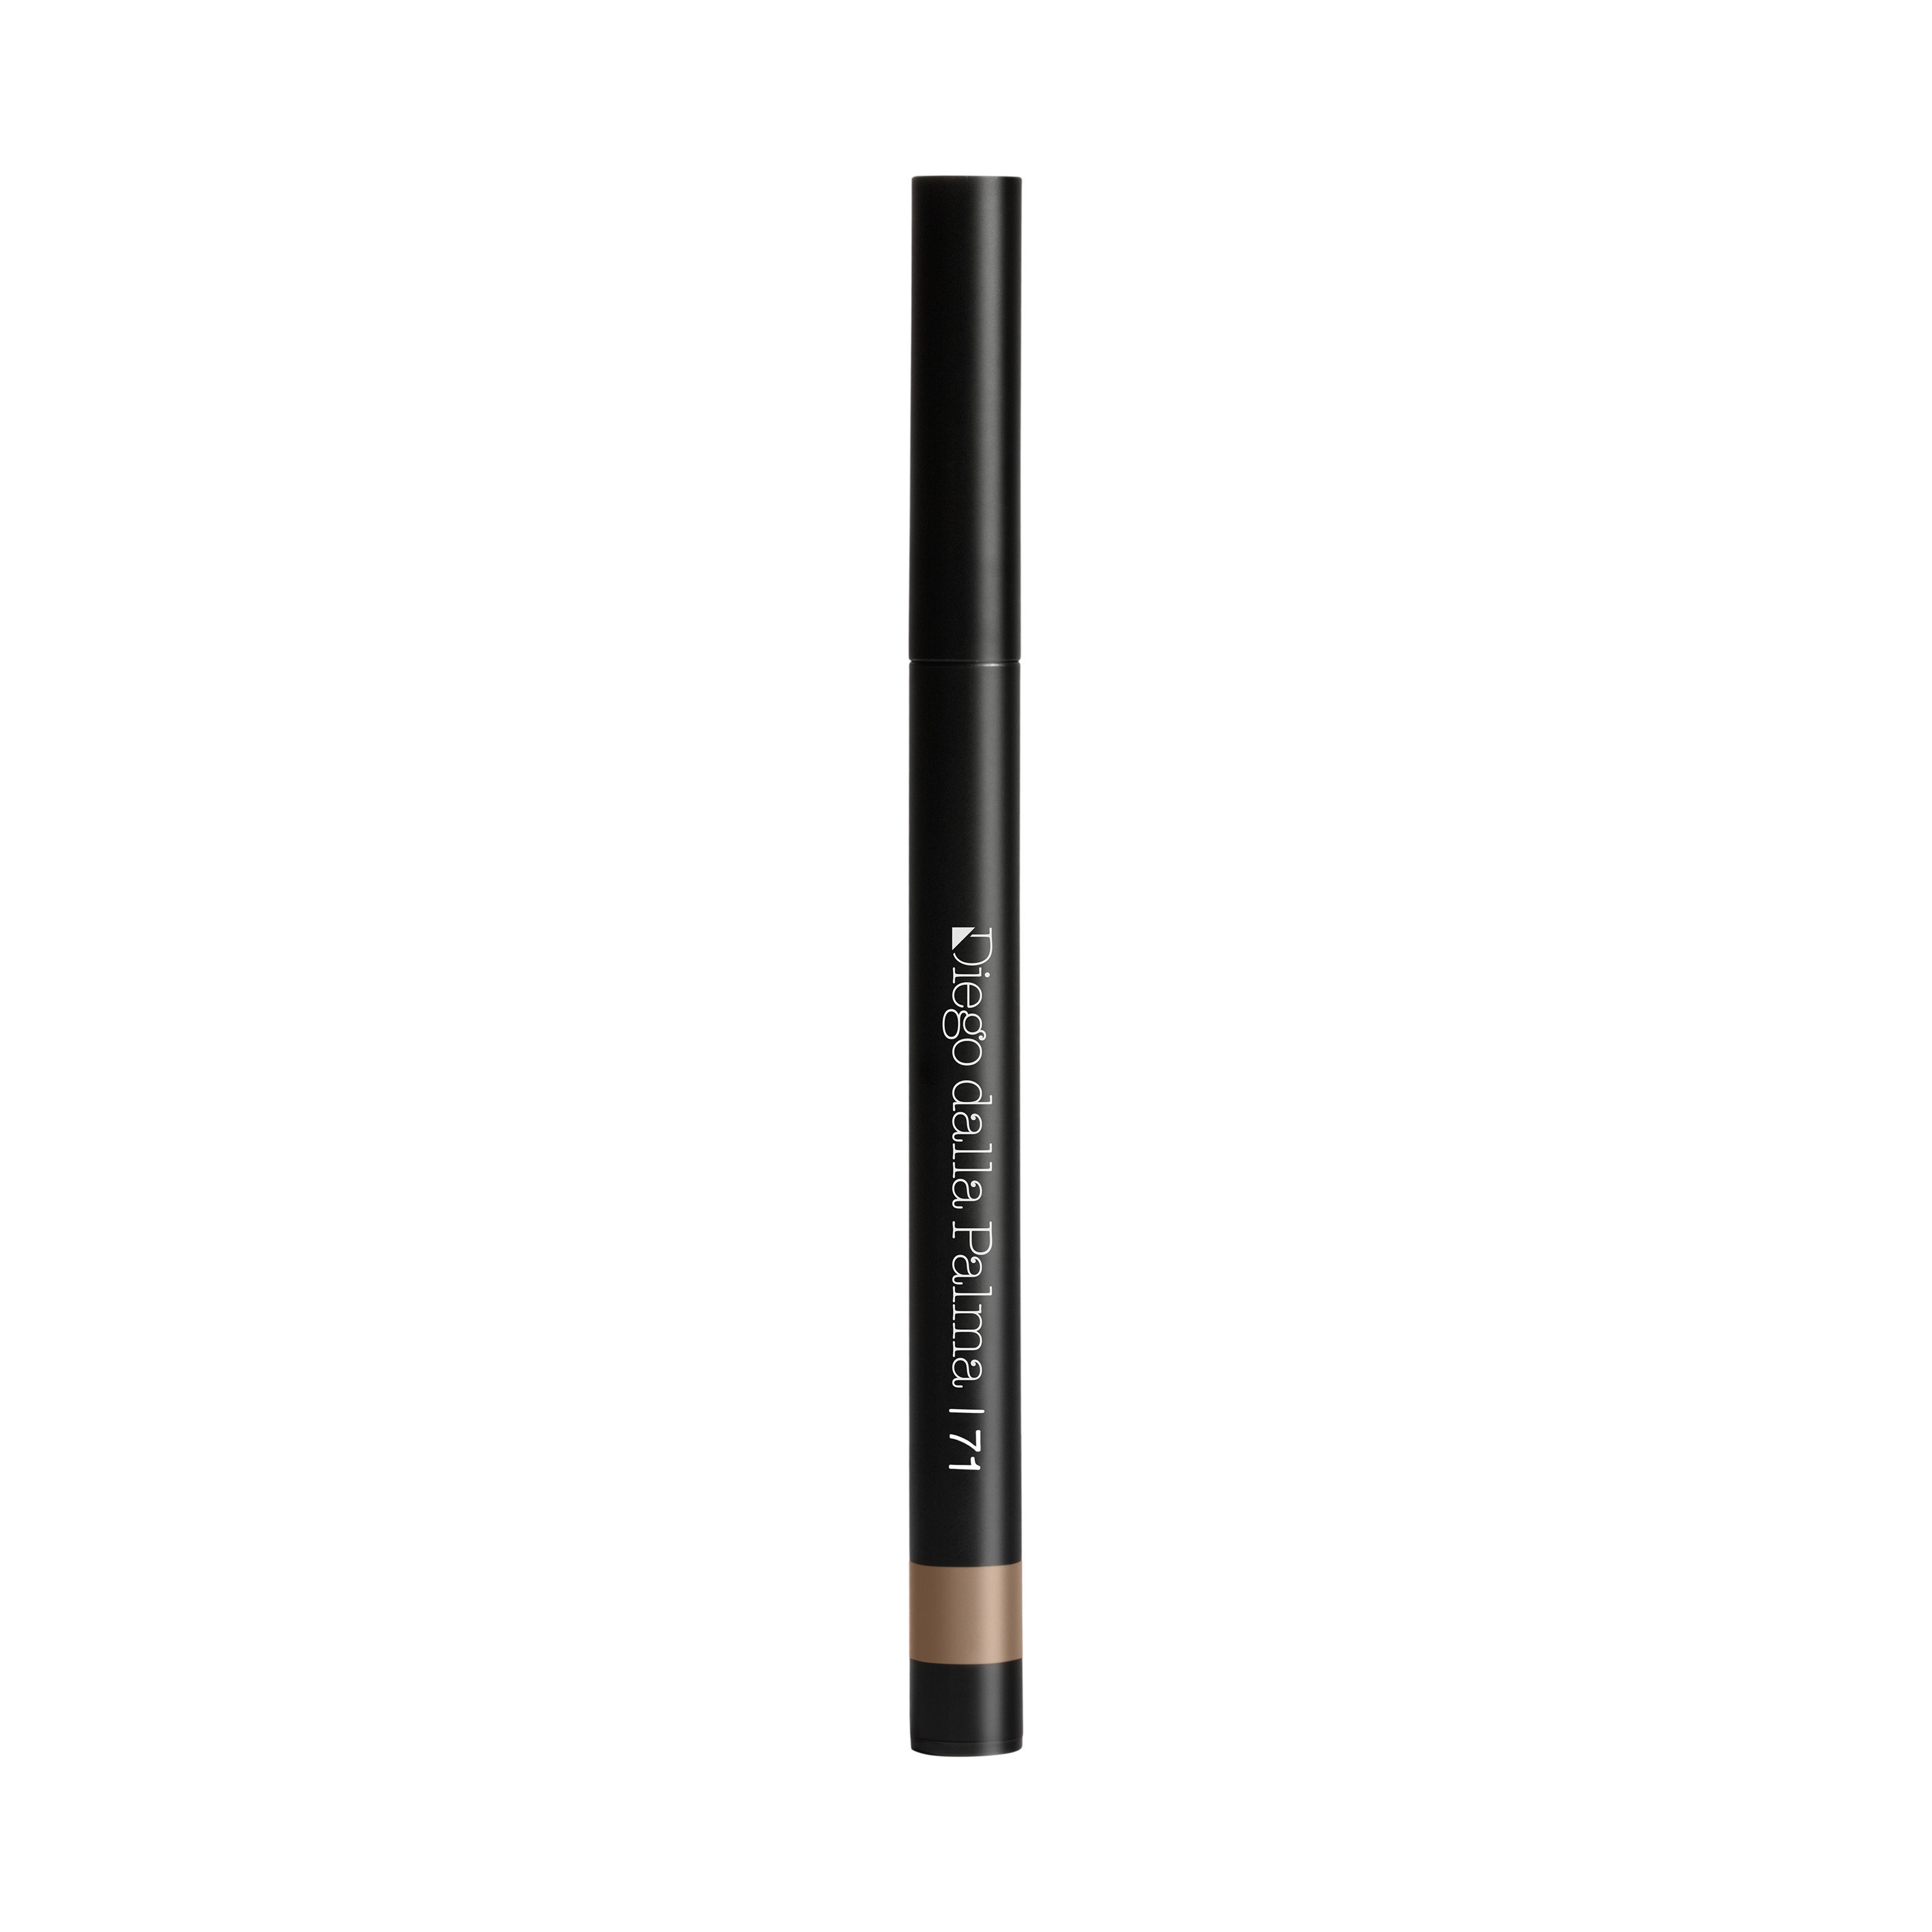 Microblading Effect Eyebrow Pen Long Lasting 24H - 71 cappuccino, Light Brown, large image number 1